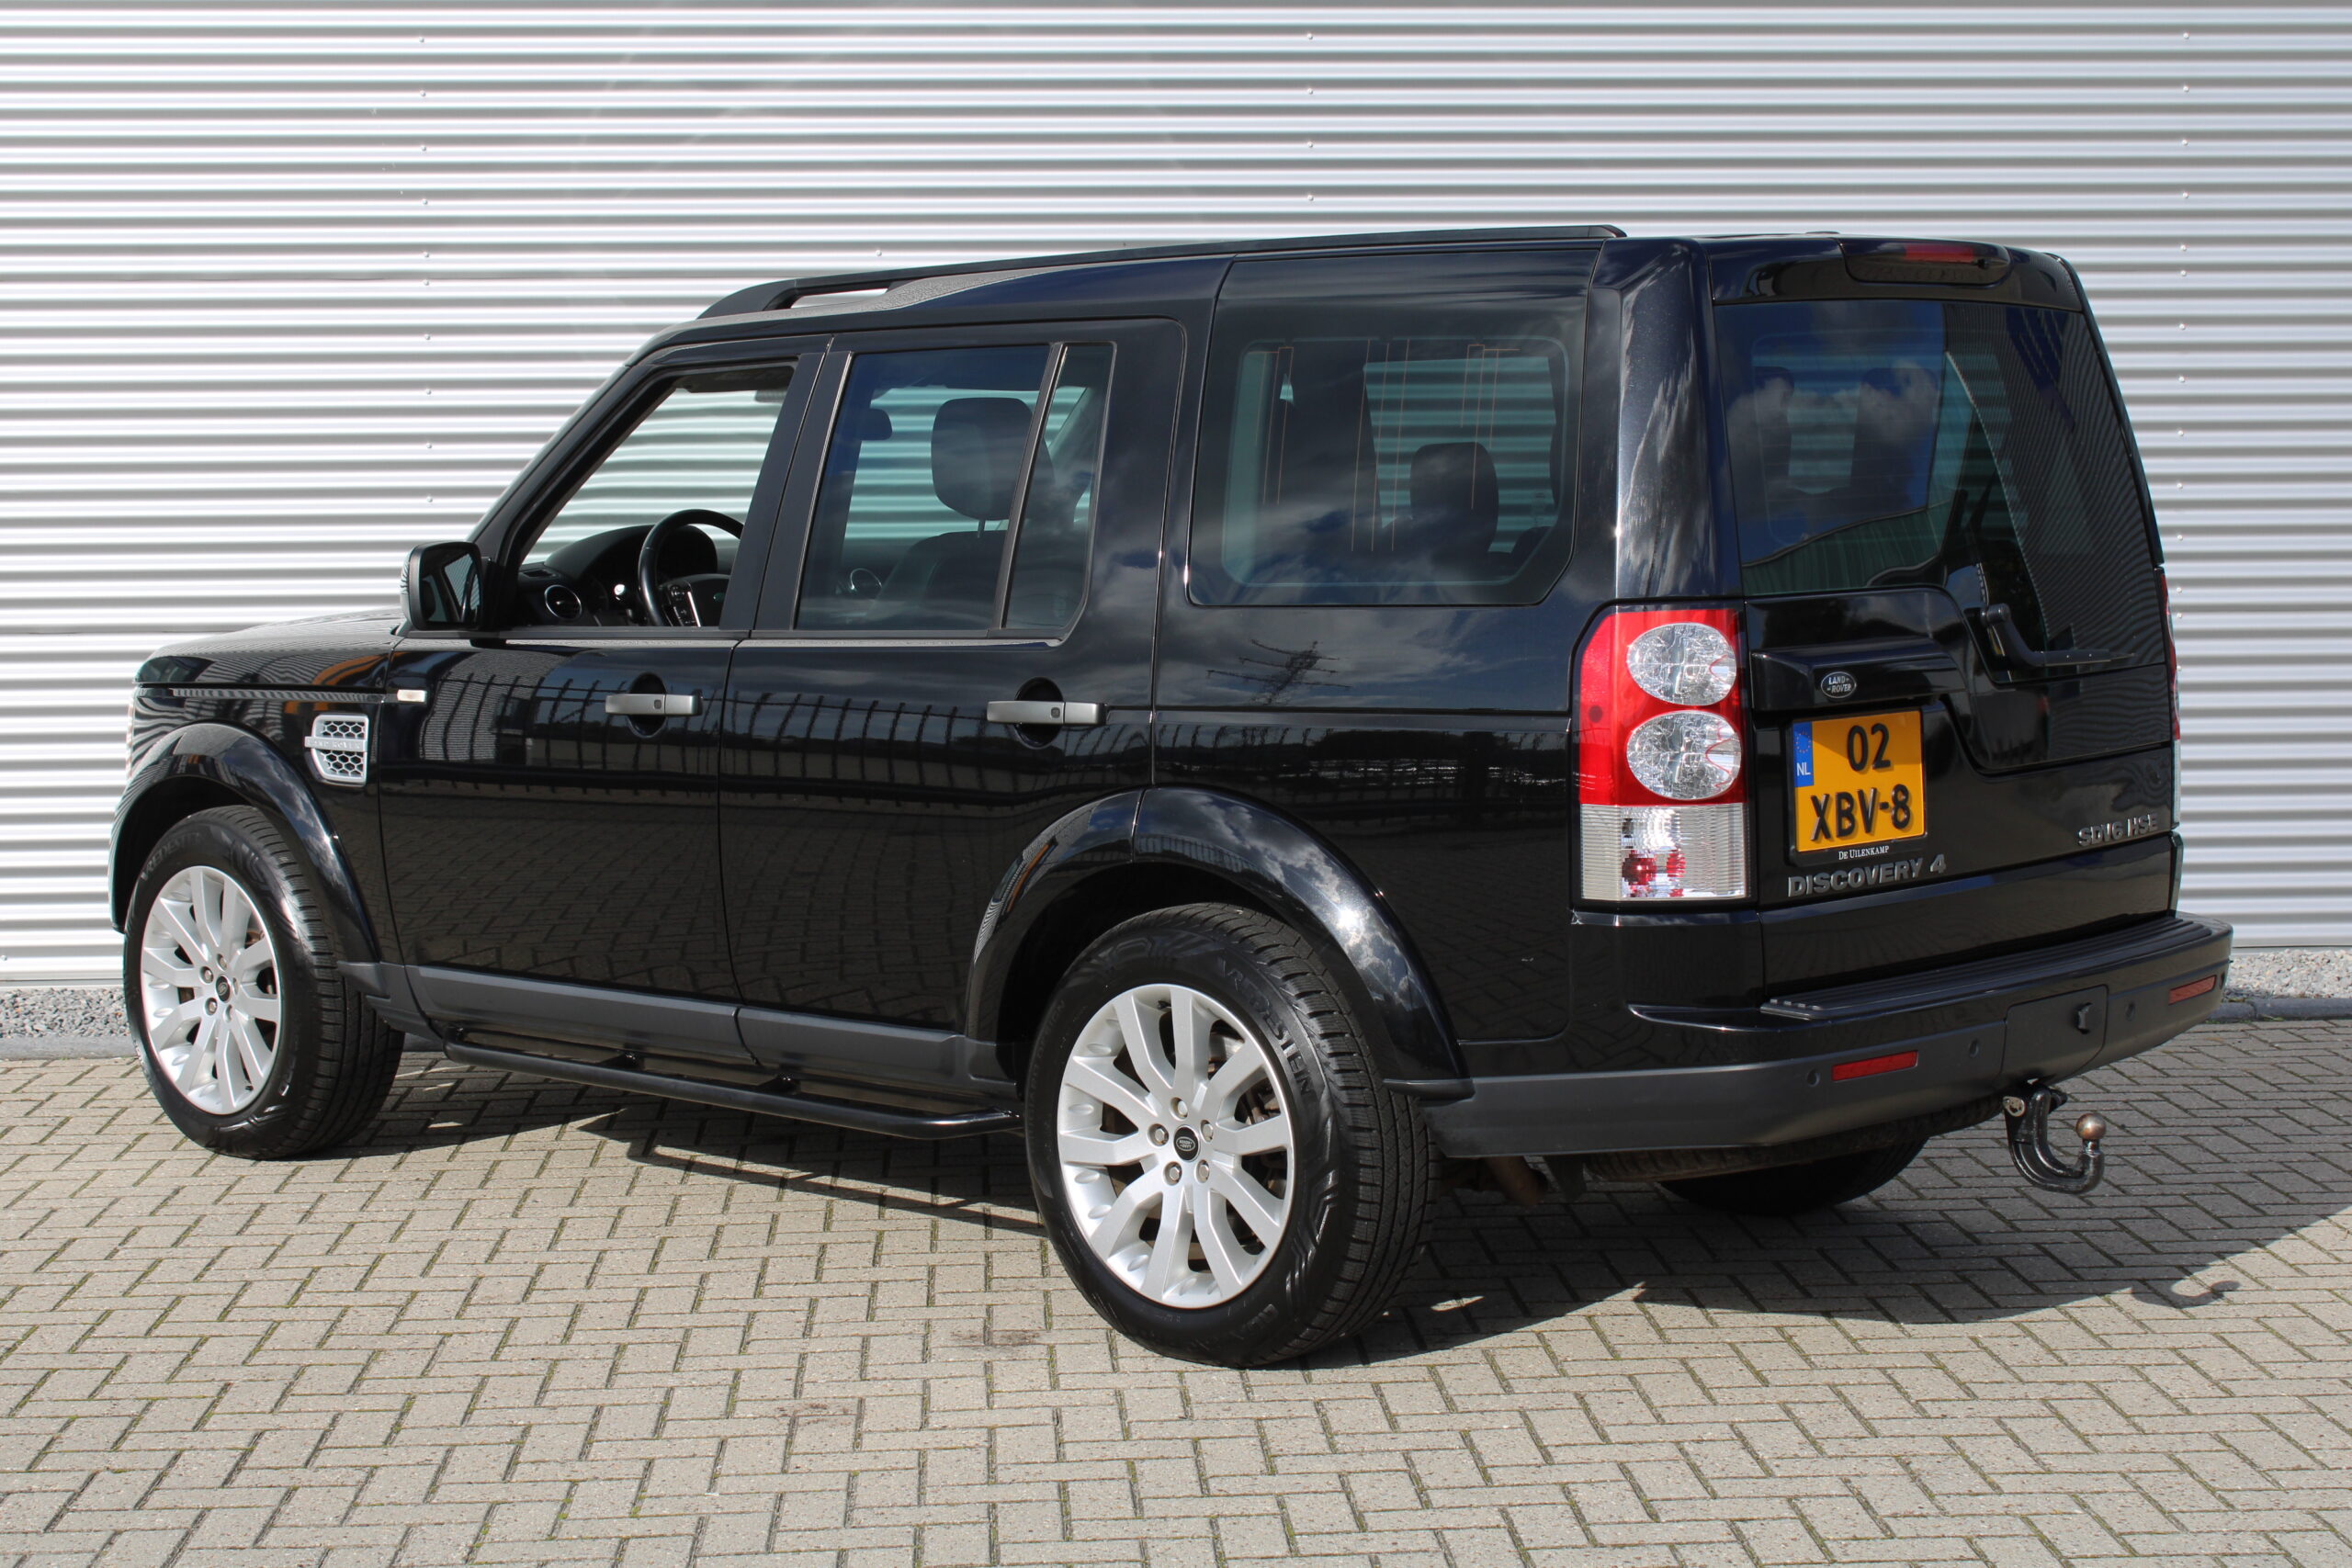 Land Rover Discovery 4 SDV6 HSE 7-Seater/ 8-traps/ Origineel NL